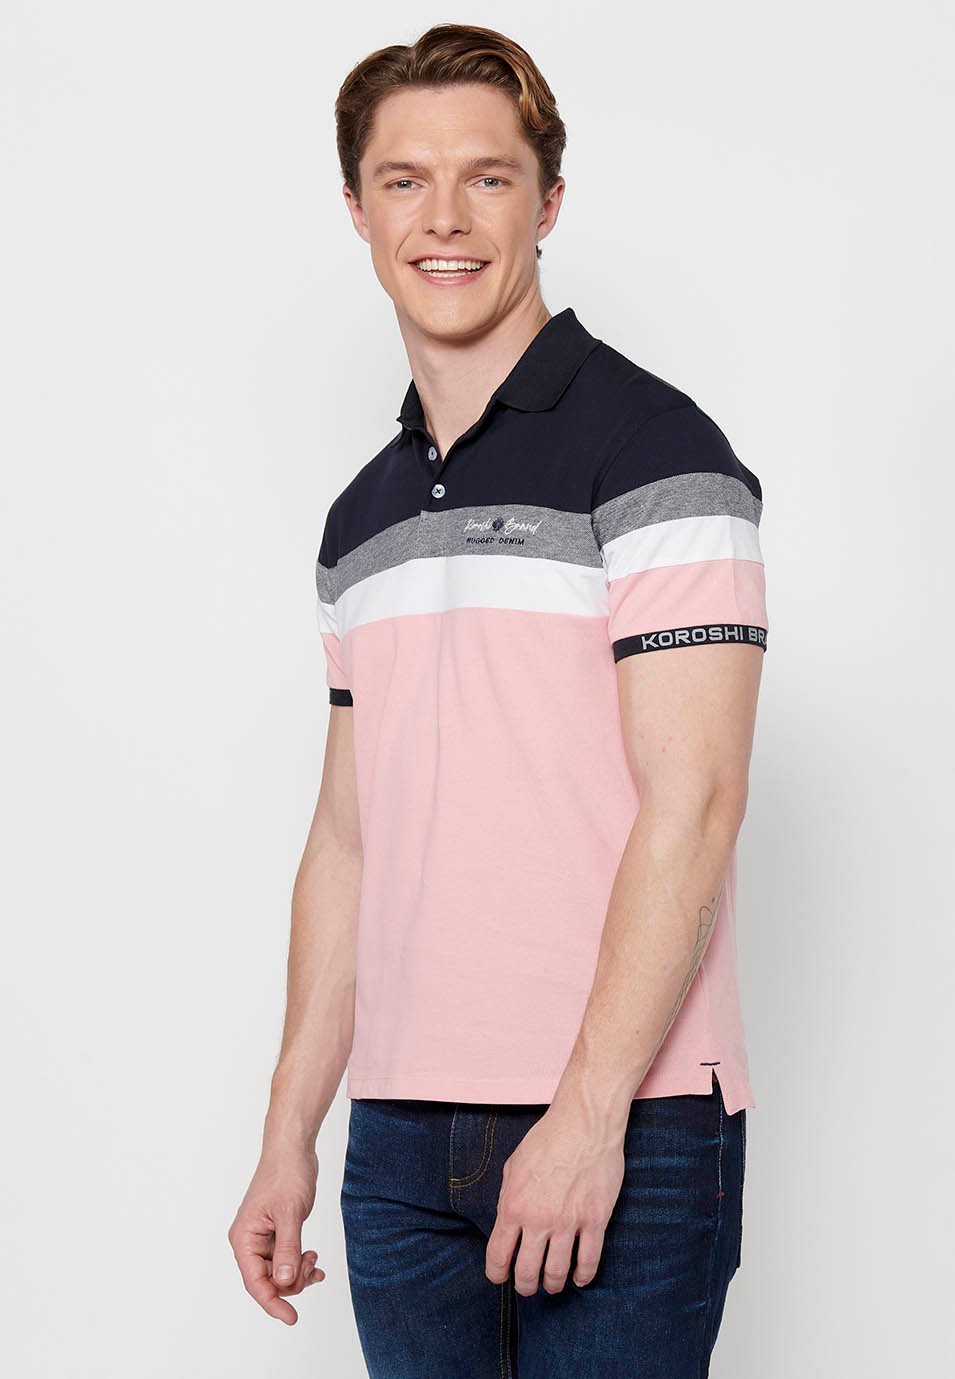 100% cotton short-sleeved polo shirt, striped detail on the chest, pink color for men